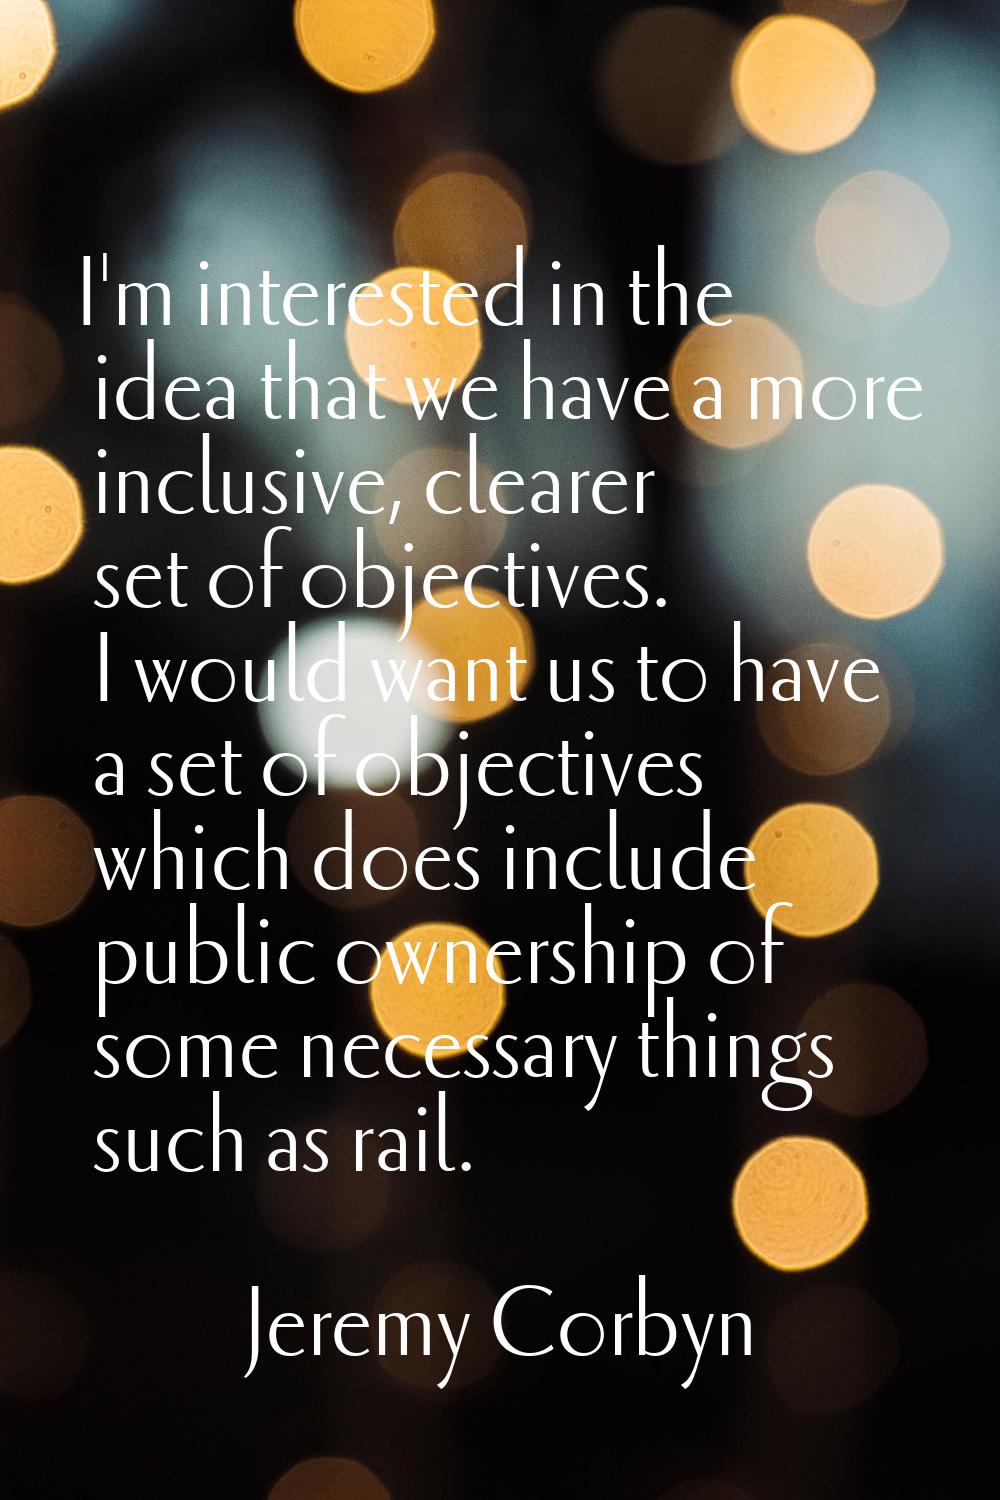 I'm interested in the idea that we have a more inclusive, clearer set of objectives. I would want u